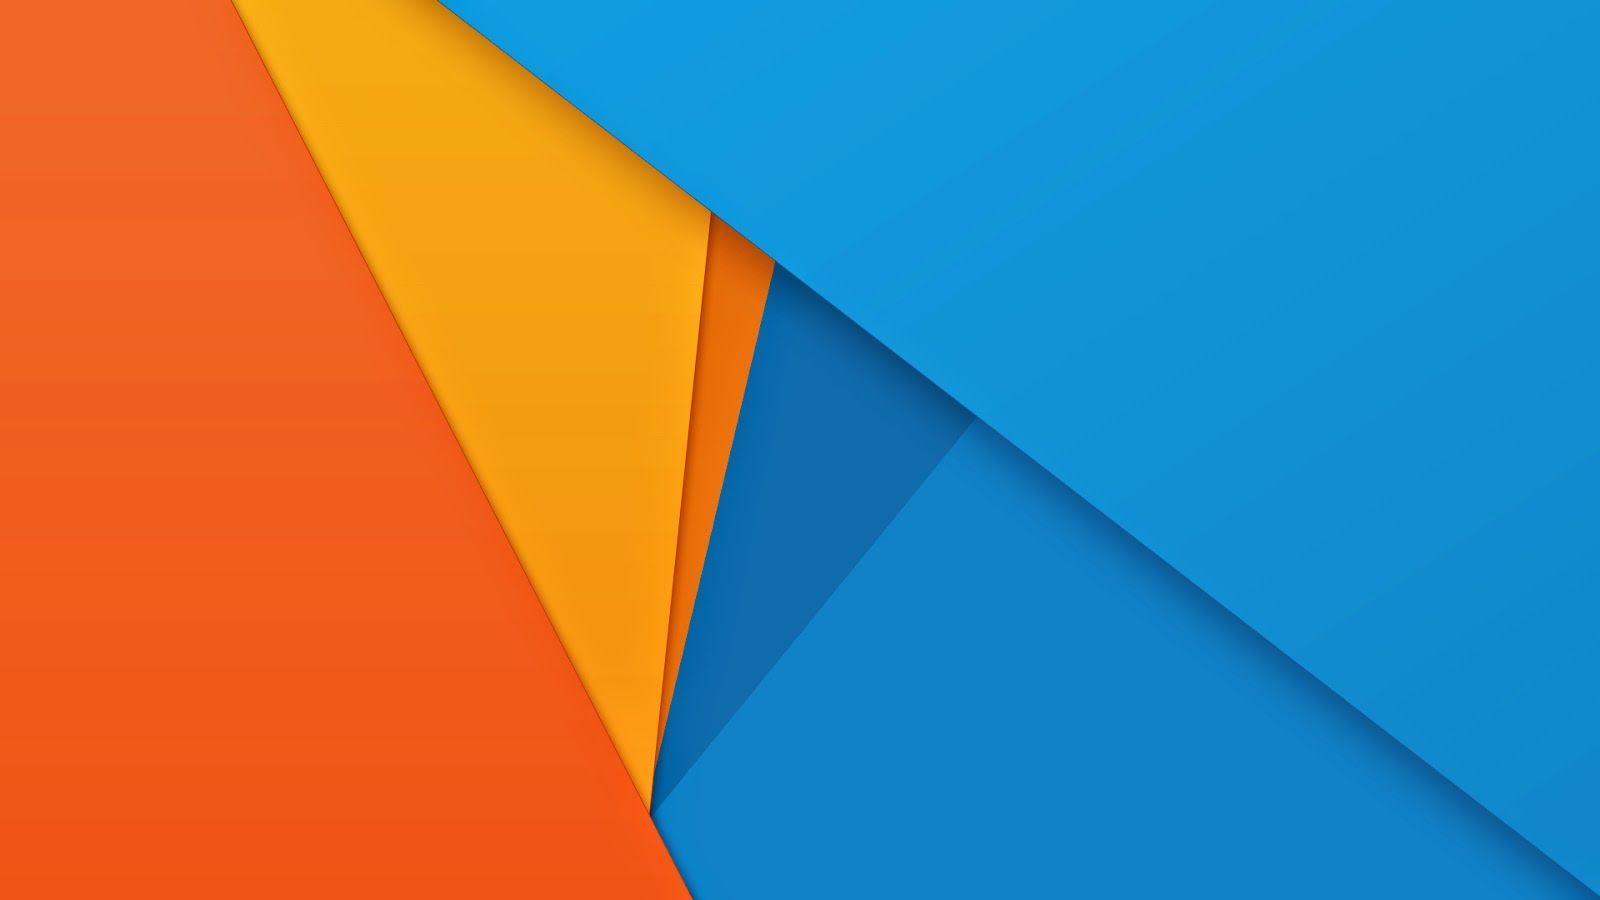 Andriod L Material Design Wallpaper Of Android